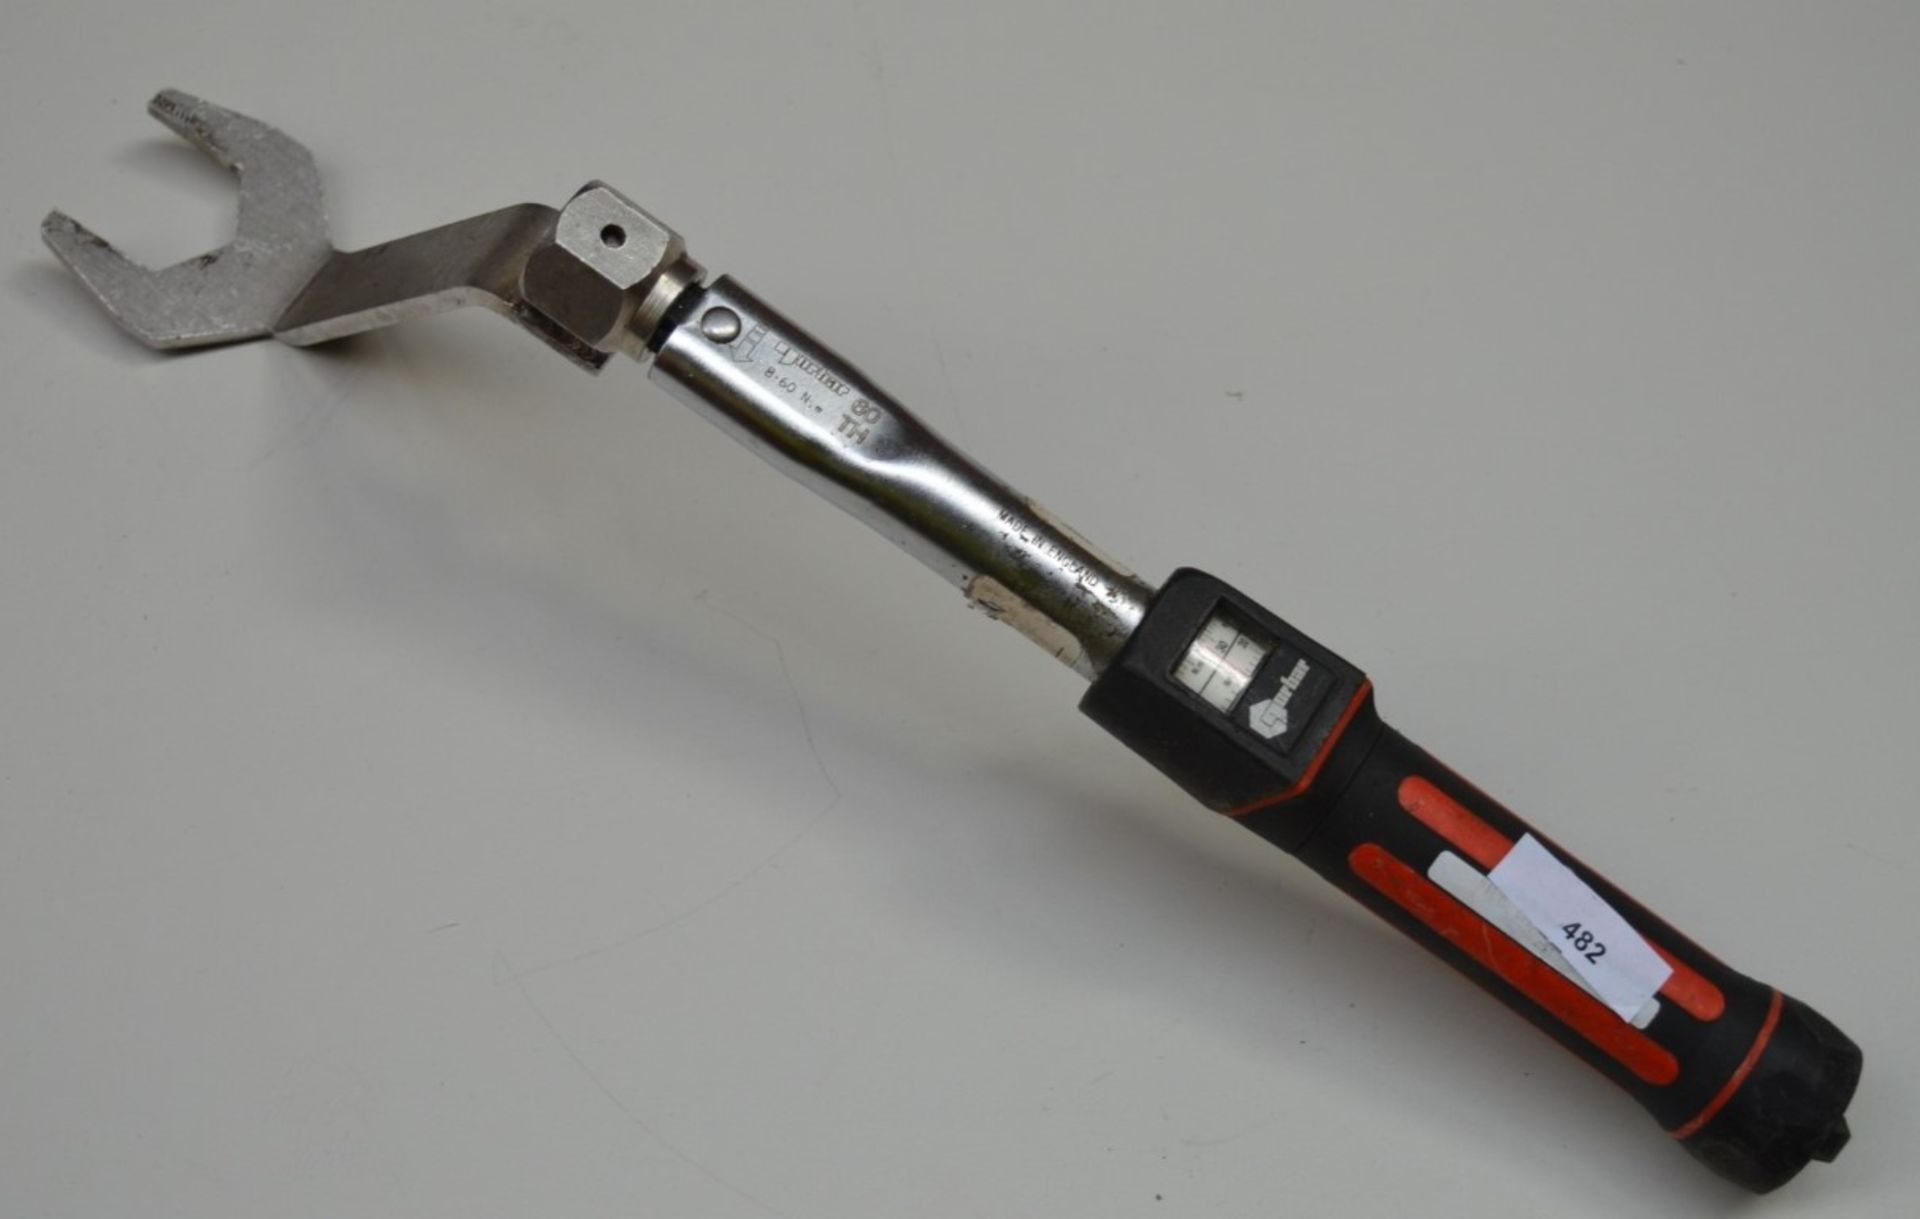 1 x Norbar 60TH Torque Wrench 8-60Nm with Spanner Attachment - CL300 - Ref PC738 - Location: - Image 2 of 2